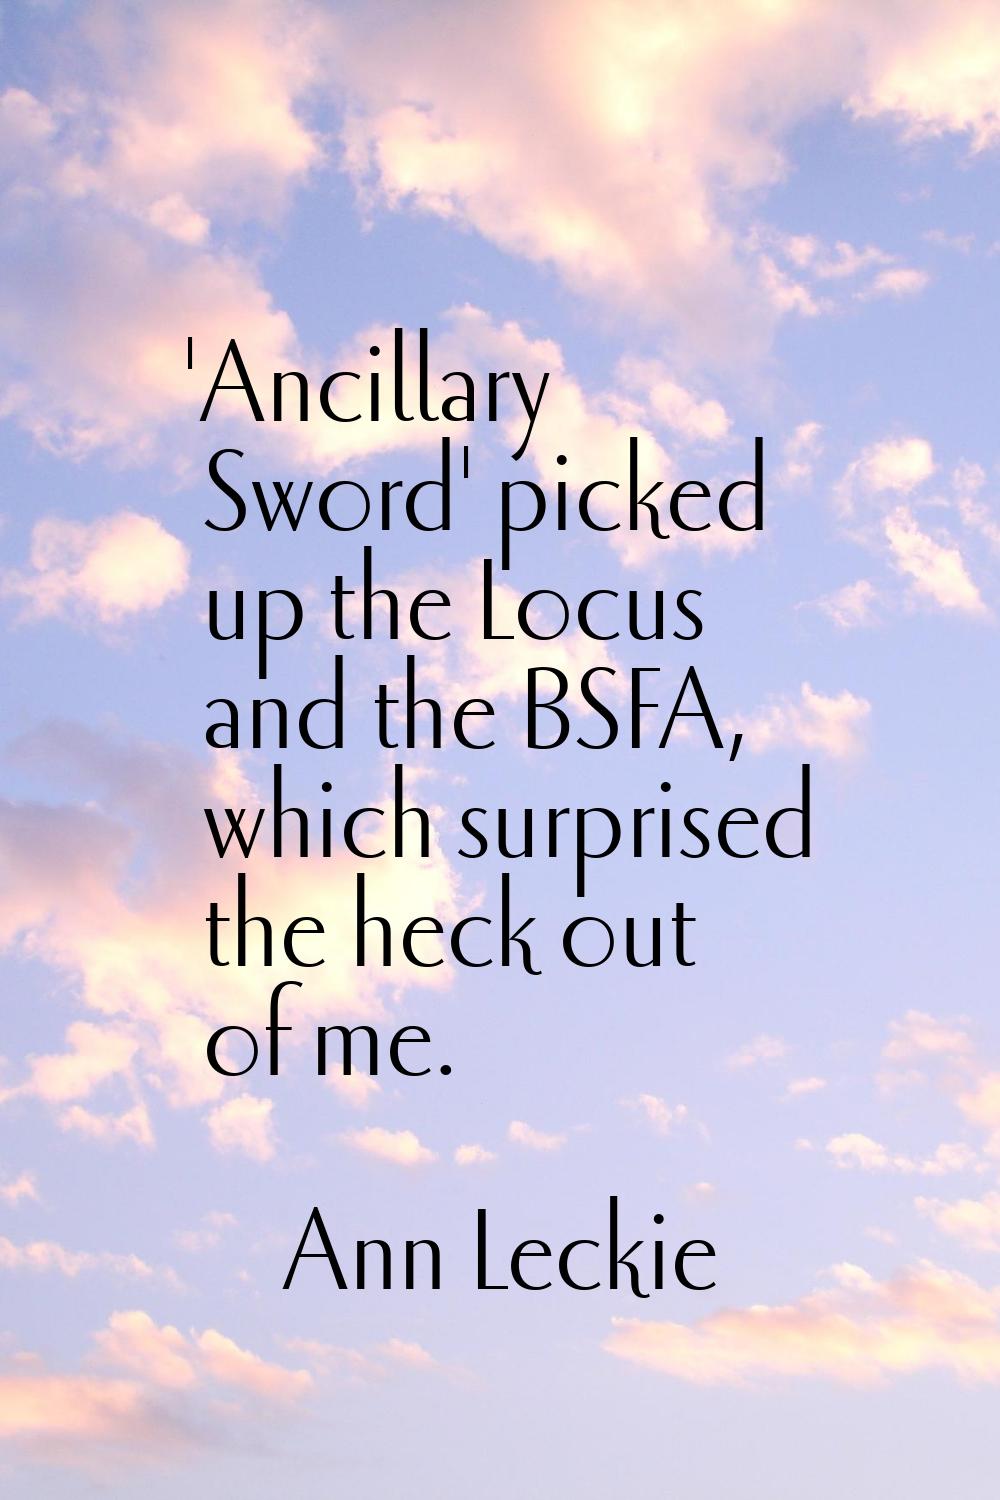 'Ancillary Sword' picked up the Locus and the BSFA, which surprised the heck out of me.